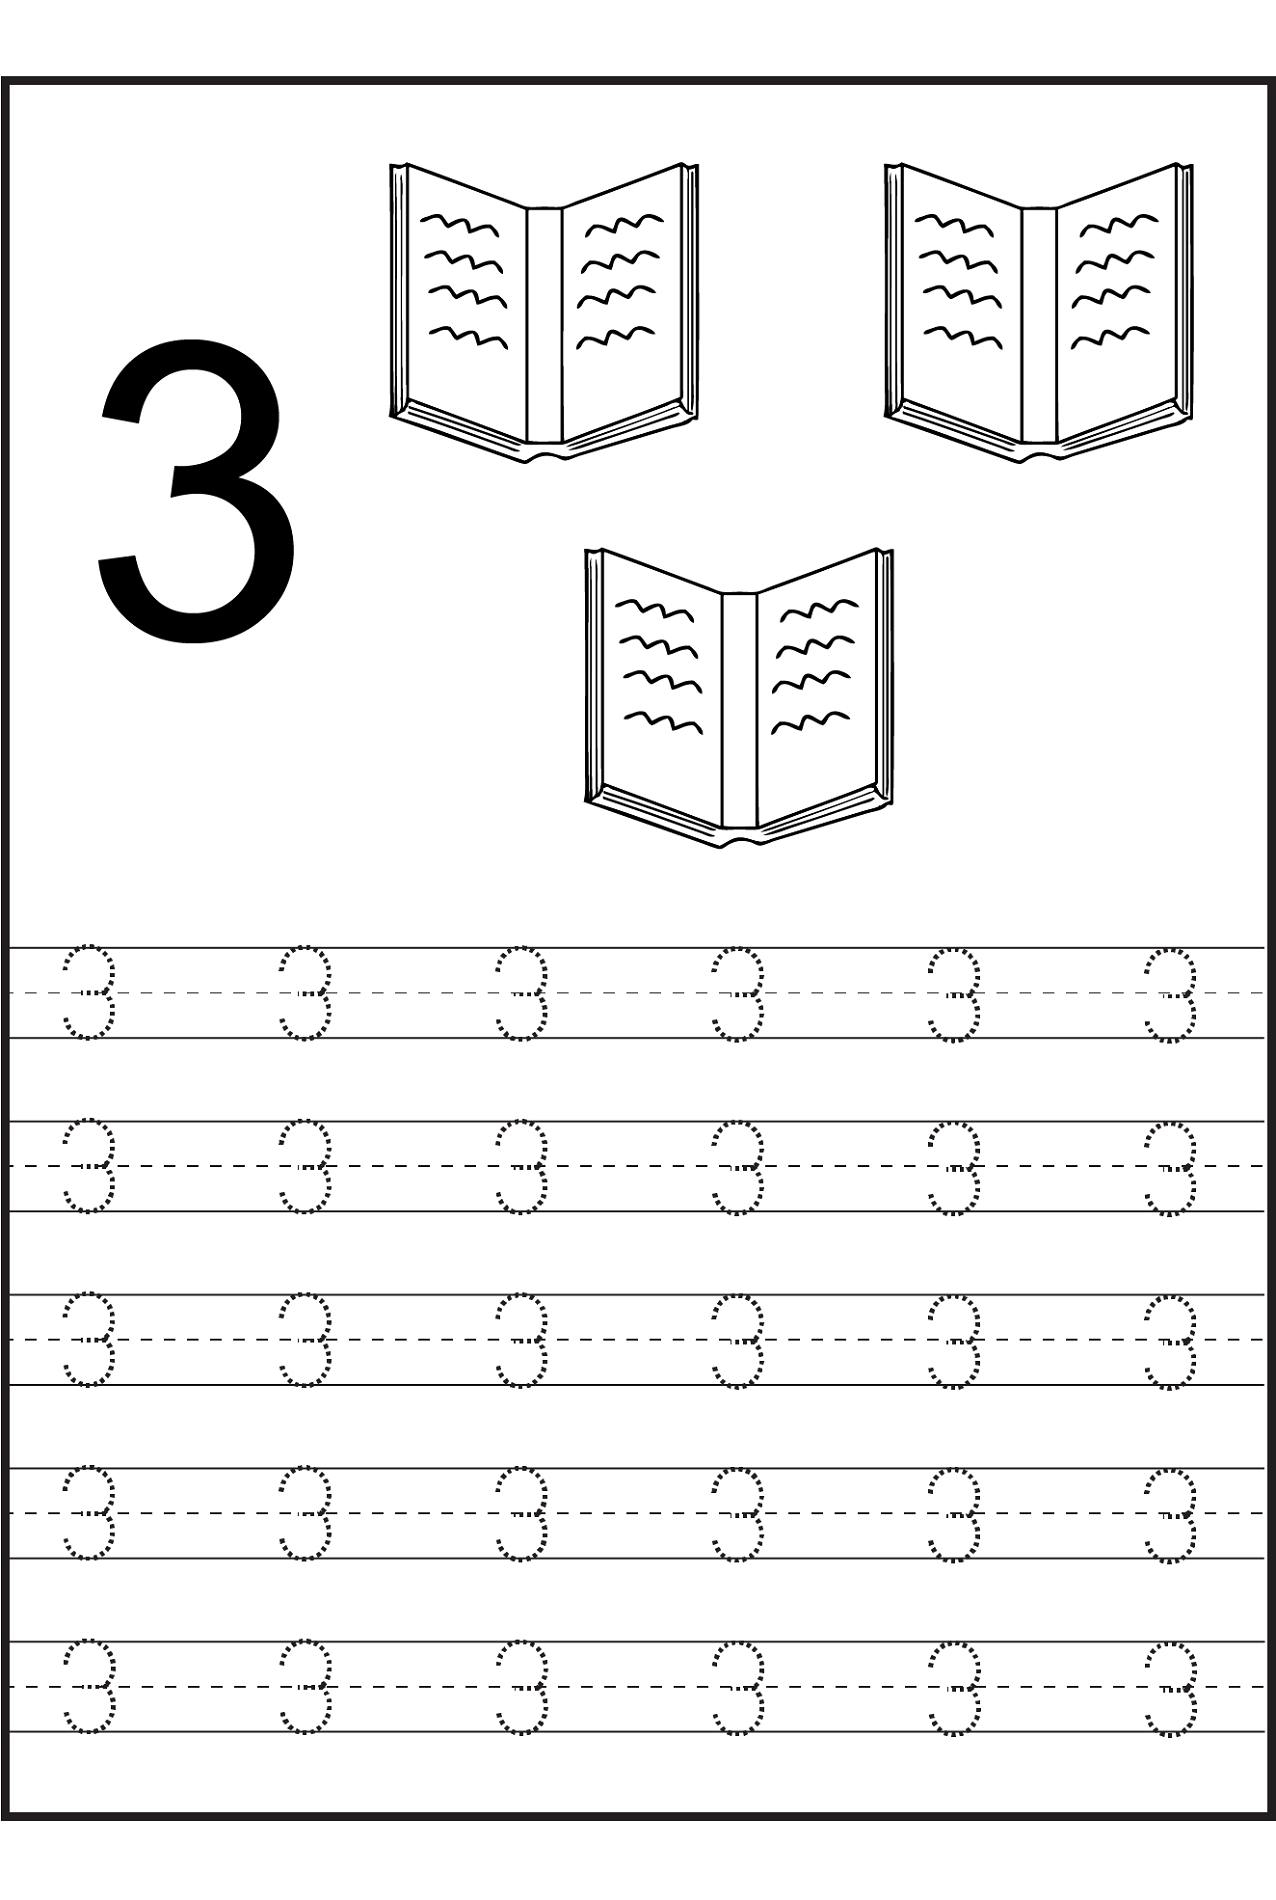 number-tracing-worksheets-pdf-free-download-goodimg-co